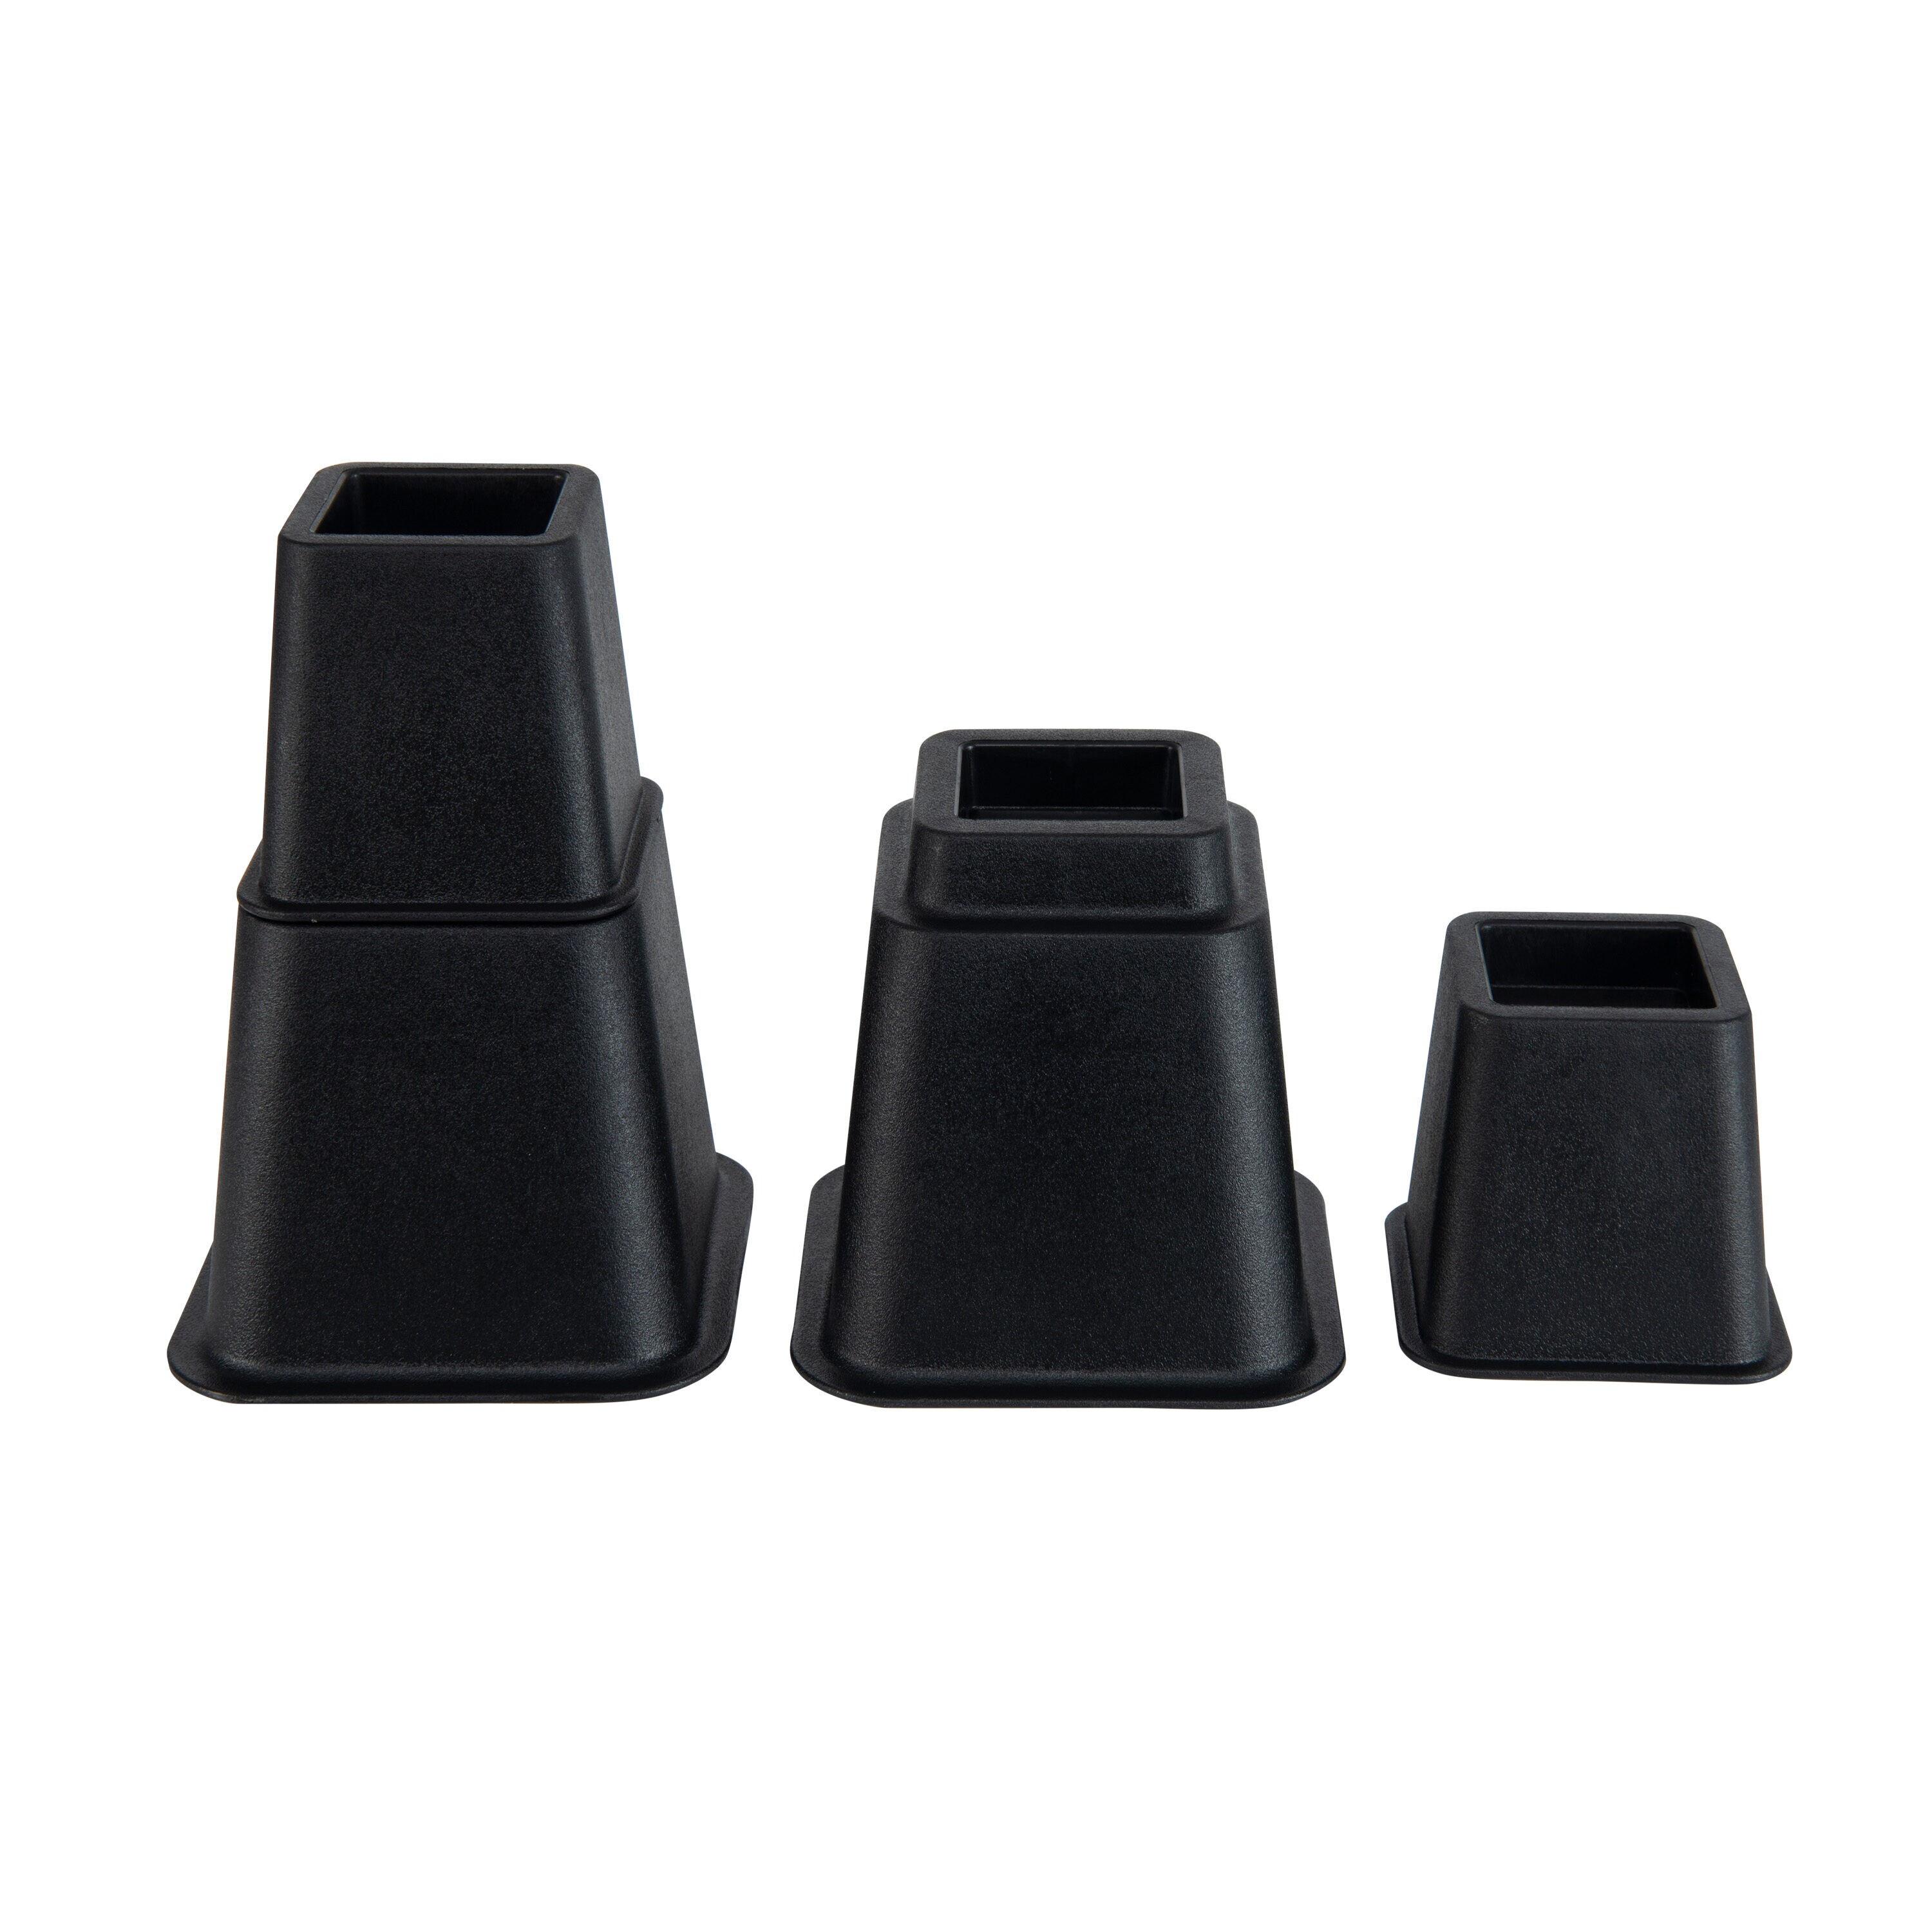 Adjustable Furniture Risers - 3, 5 and 8 Inch Heavy Duty Riser by